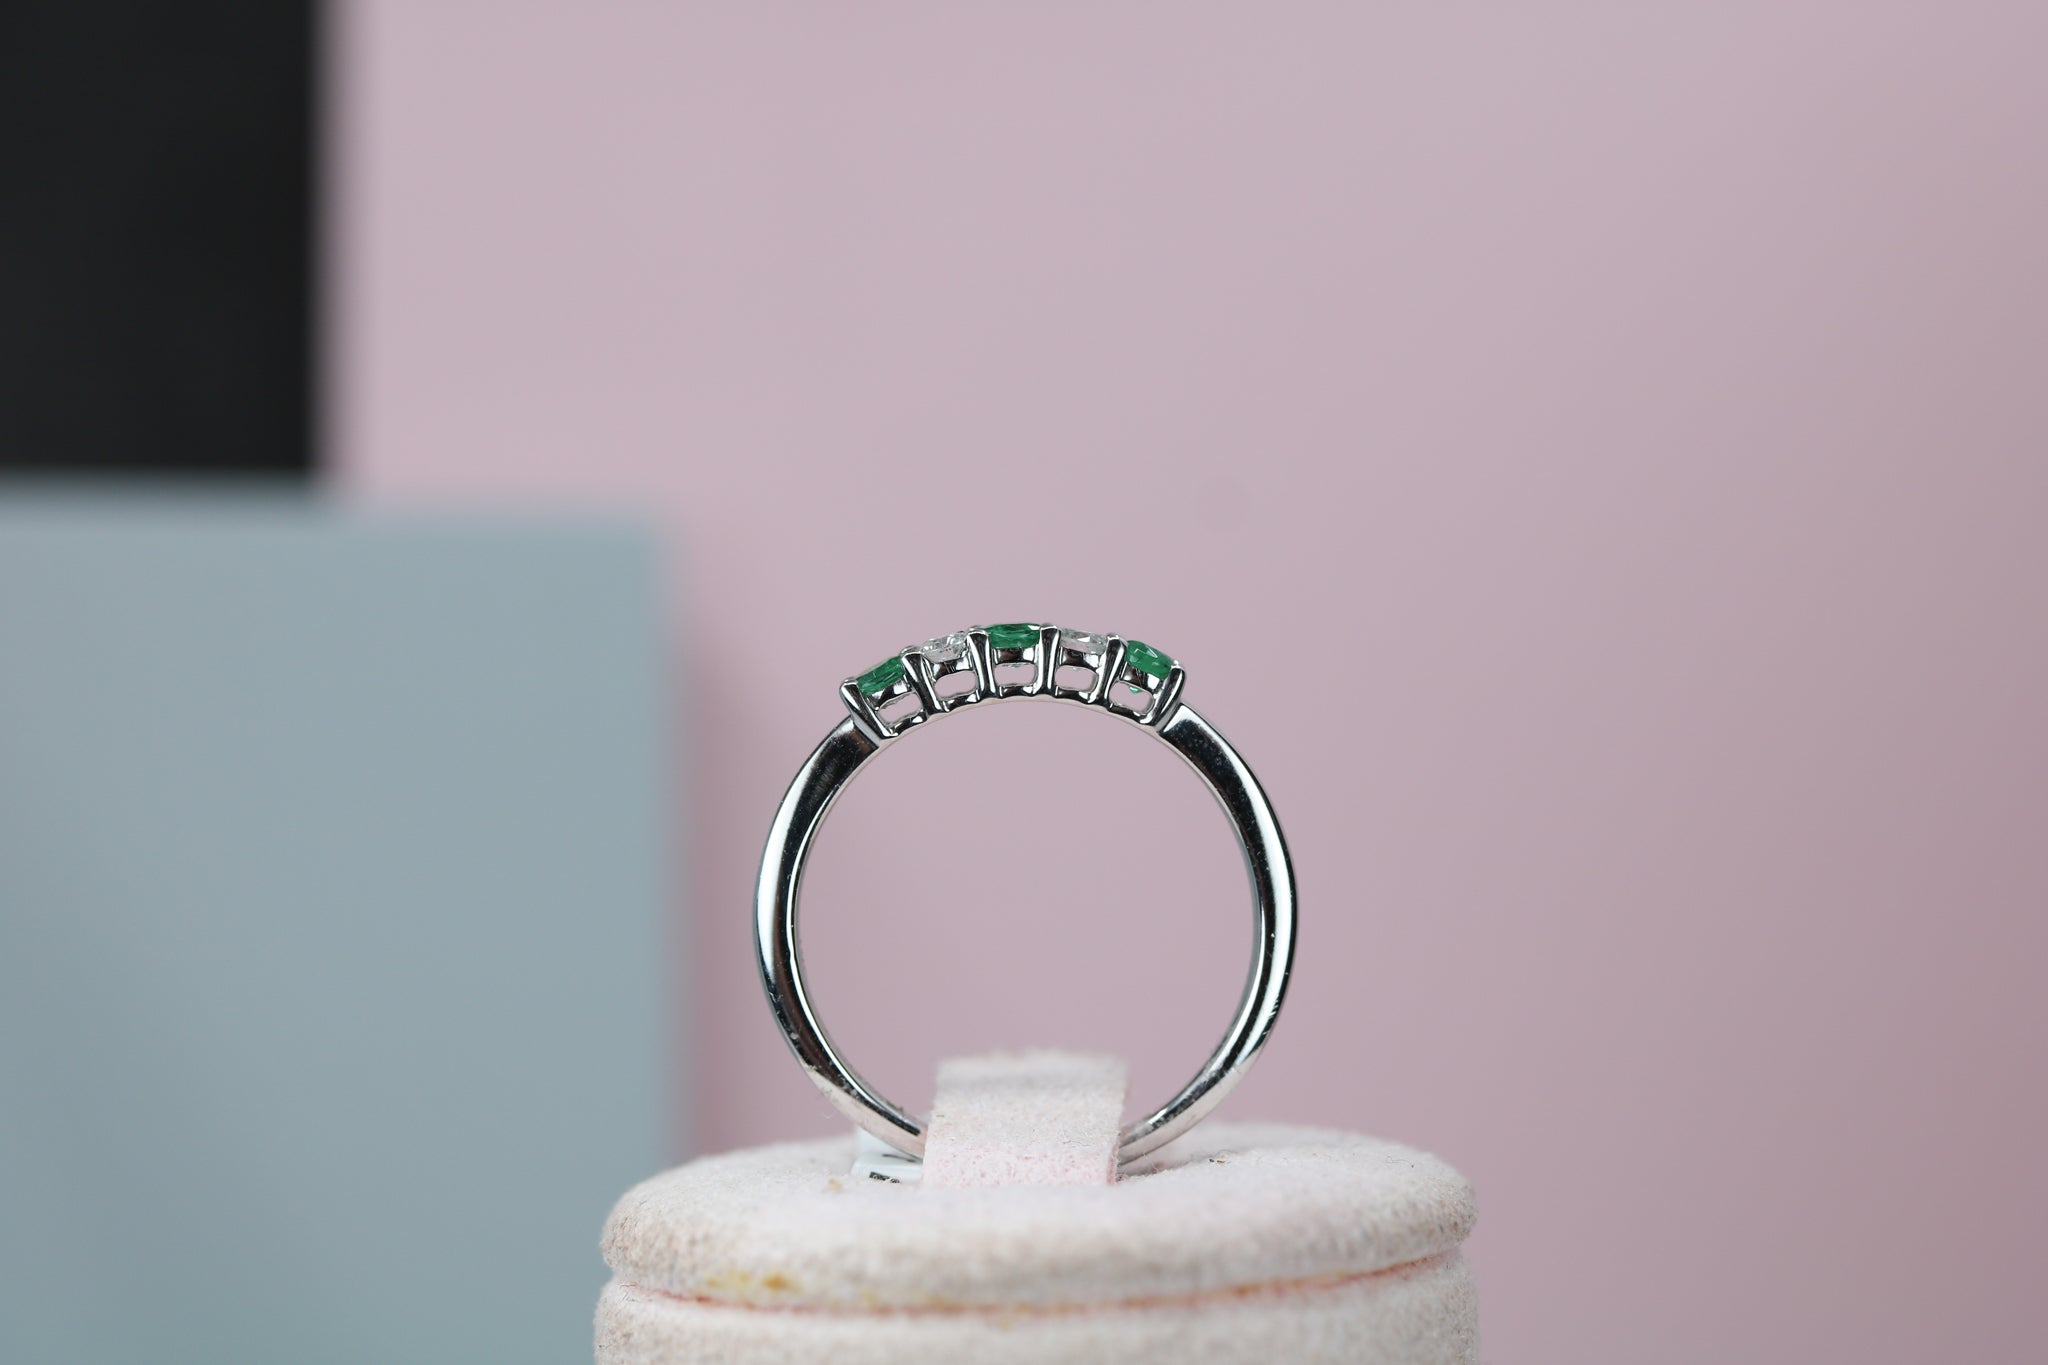 18ct White Gold Emerald & Diamond Ring - HJ2071 - Hallmark Jewellers Formby & The Jewellers Bench Widnes